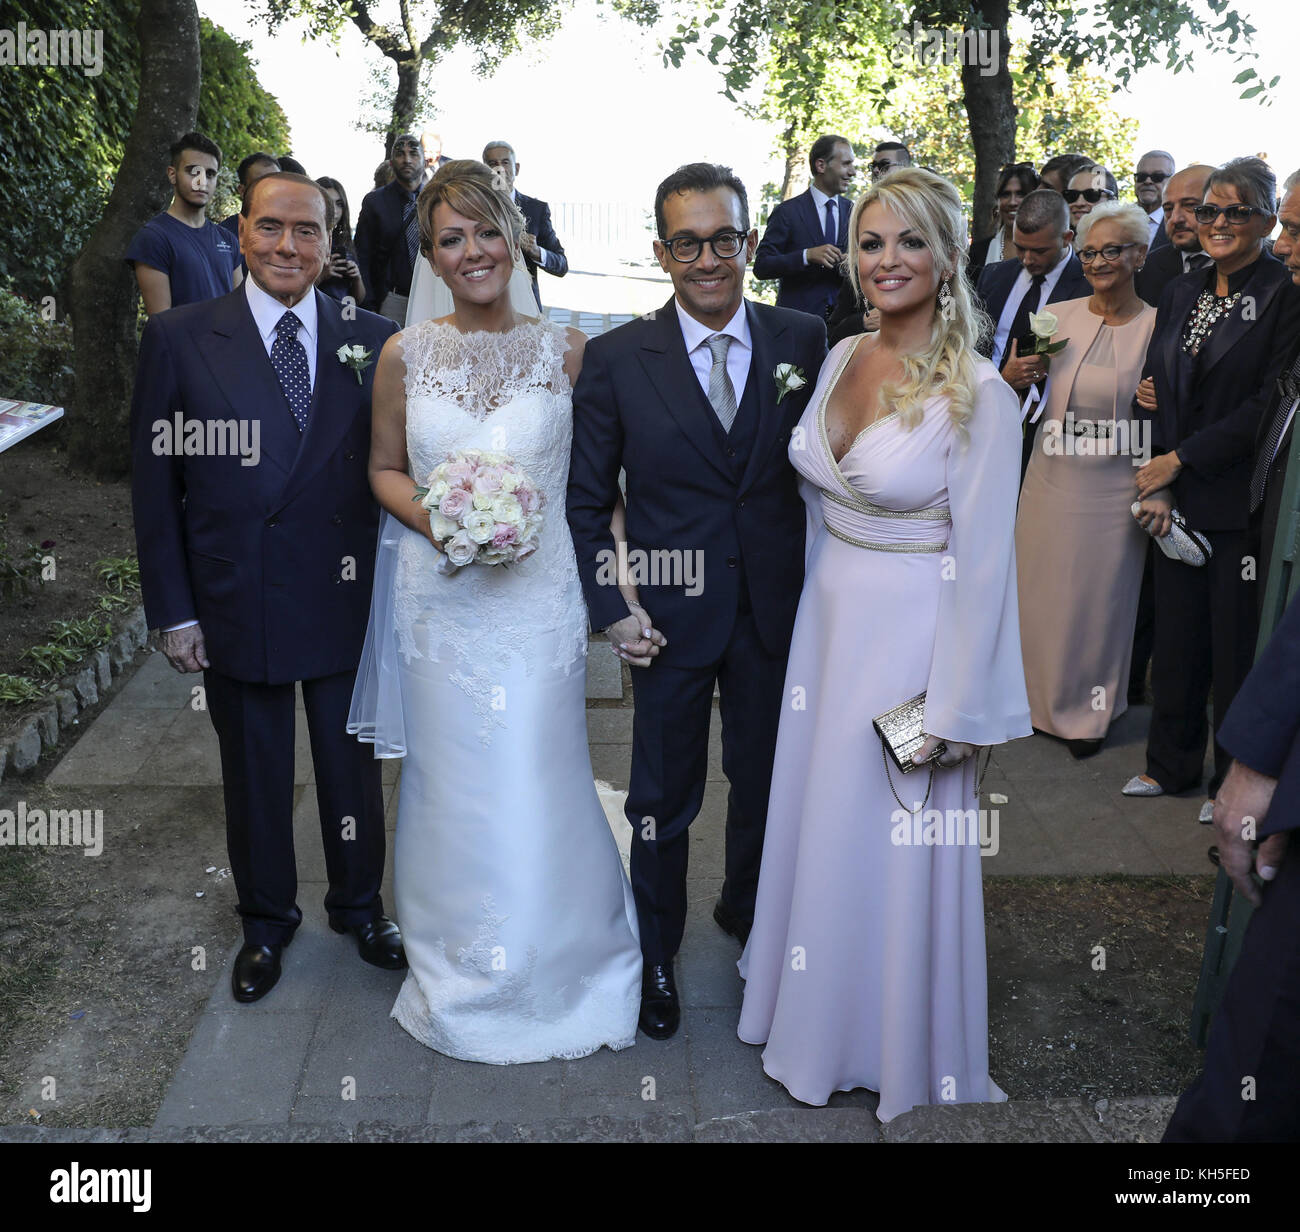 Silvio Berlusconi and his partner Francesca Pascale attend the wedding of her sister Marianna Pascale in Ravello  Featuring: Silvio Berlusconi, Francesca Pascale, Marianna Pascale, Carlo Pasquale Gargiulo Where: Ravello, Italy When: 13 Oct 2017 Credit: IPA/WENN.com  **Only available for publication in UK, USA, Germany, Austria, Switzerland** Stock Photo